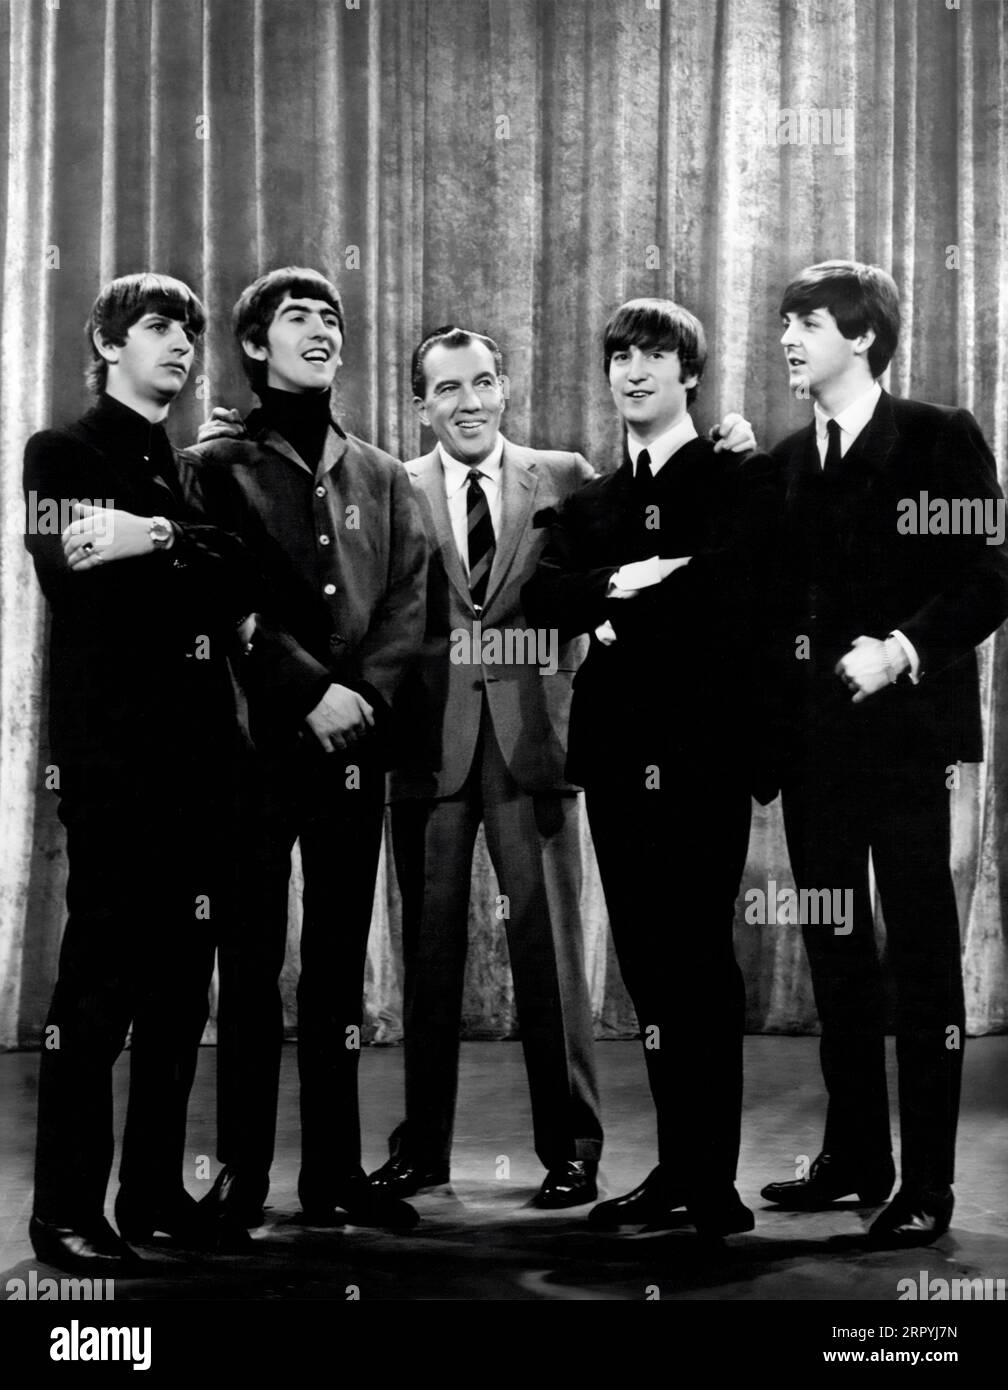 The Beatles appearing with Ed Sullivan in the United States on the Ed Sullivan Show on February 9, 1964. (USA) Stock Photo